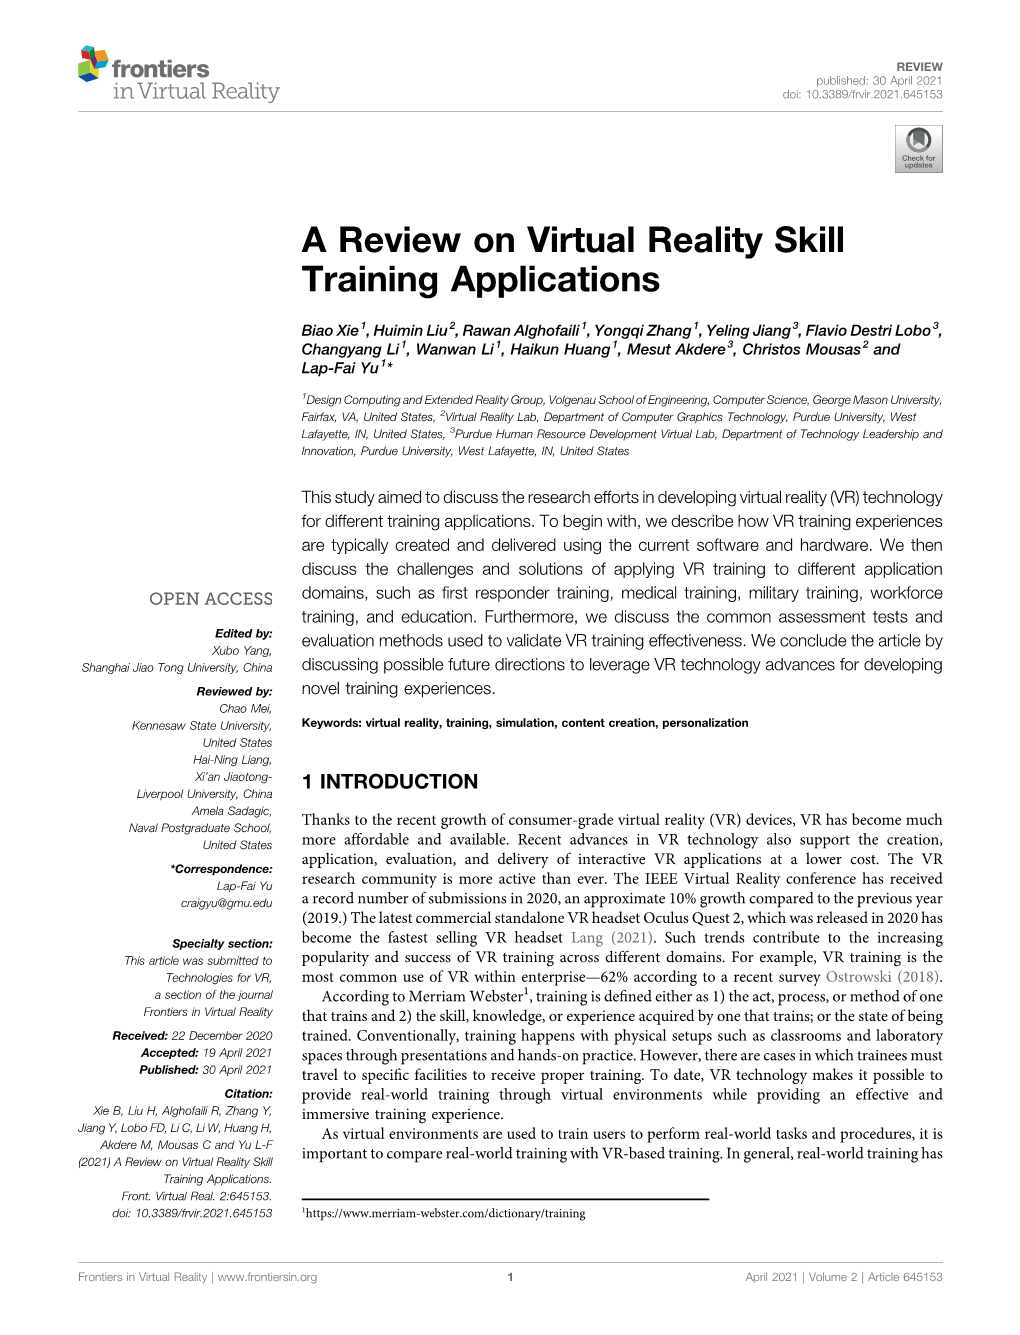 A Review on Virtual Reality Skill Training Applications